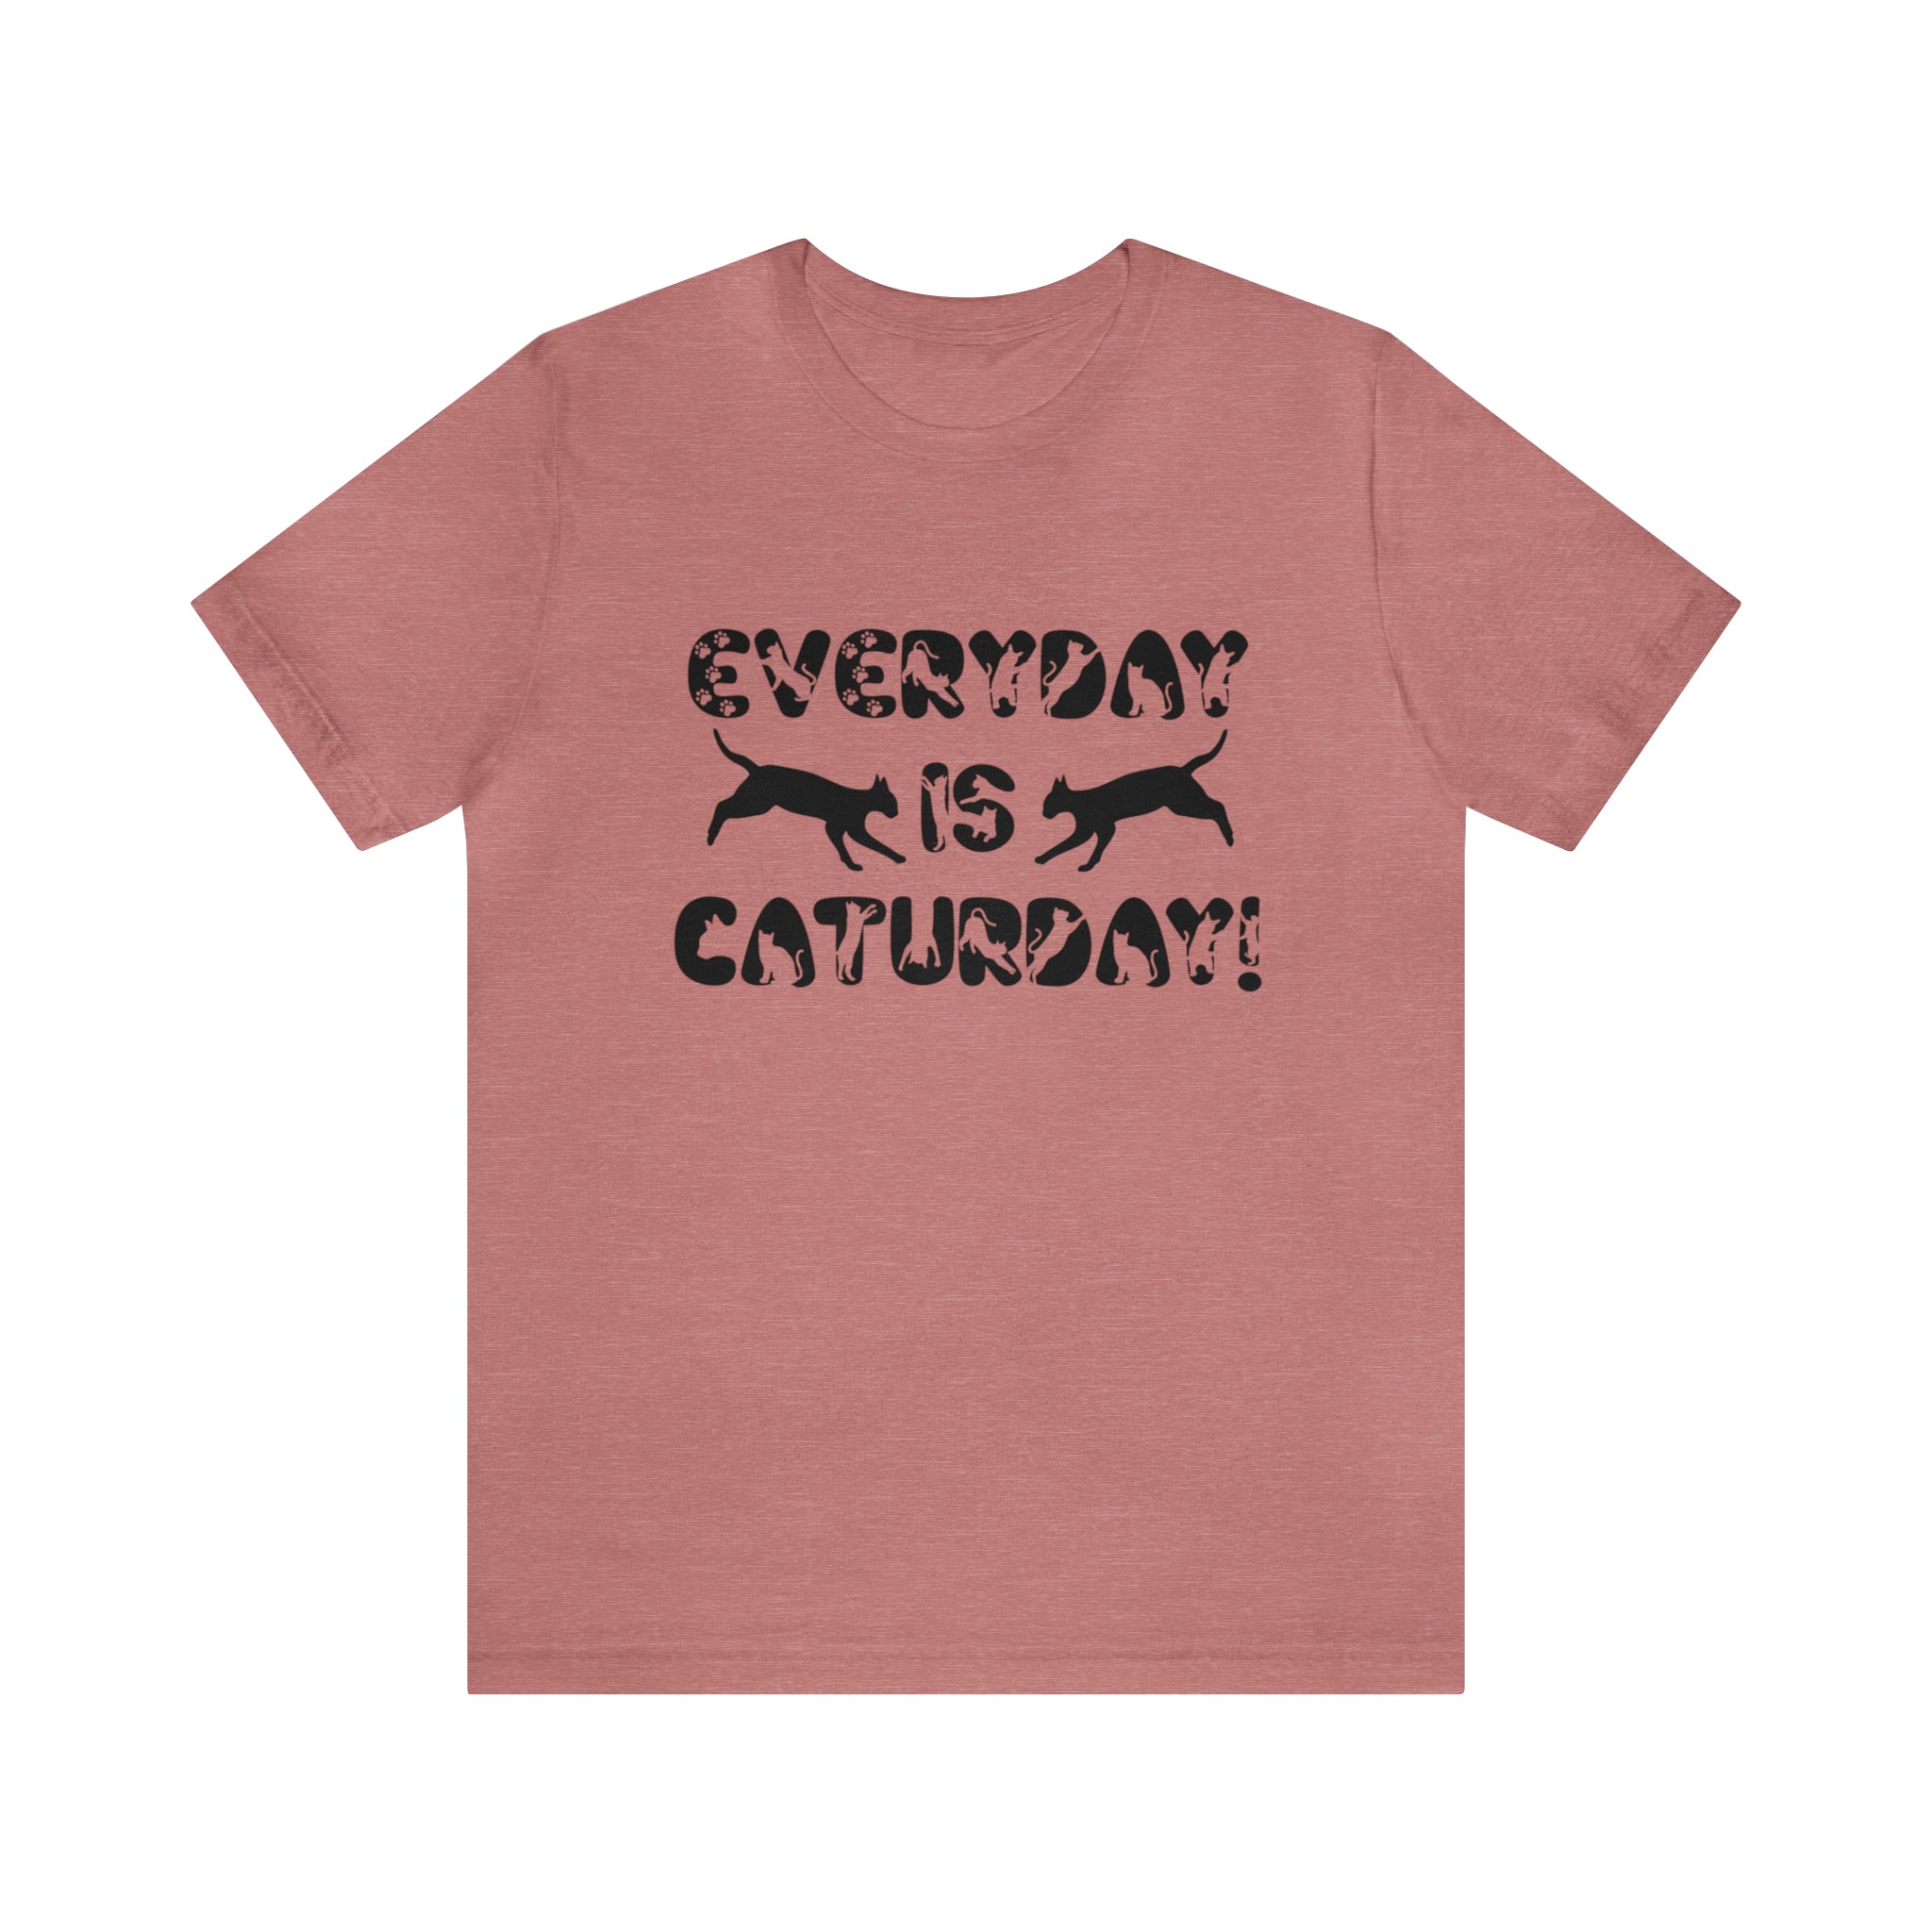 Everyday is caturday t-shirt mauve